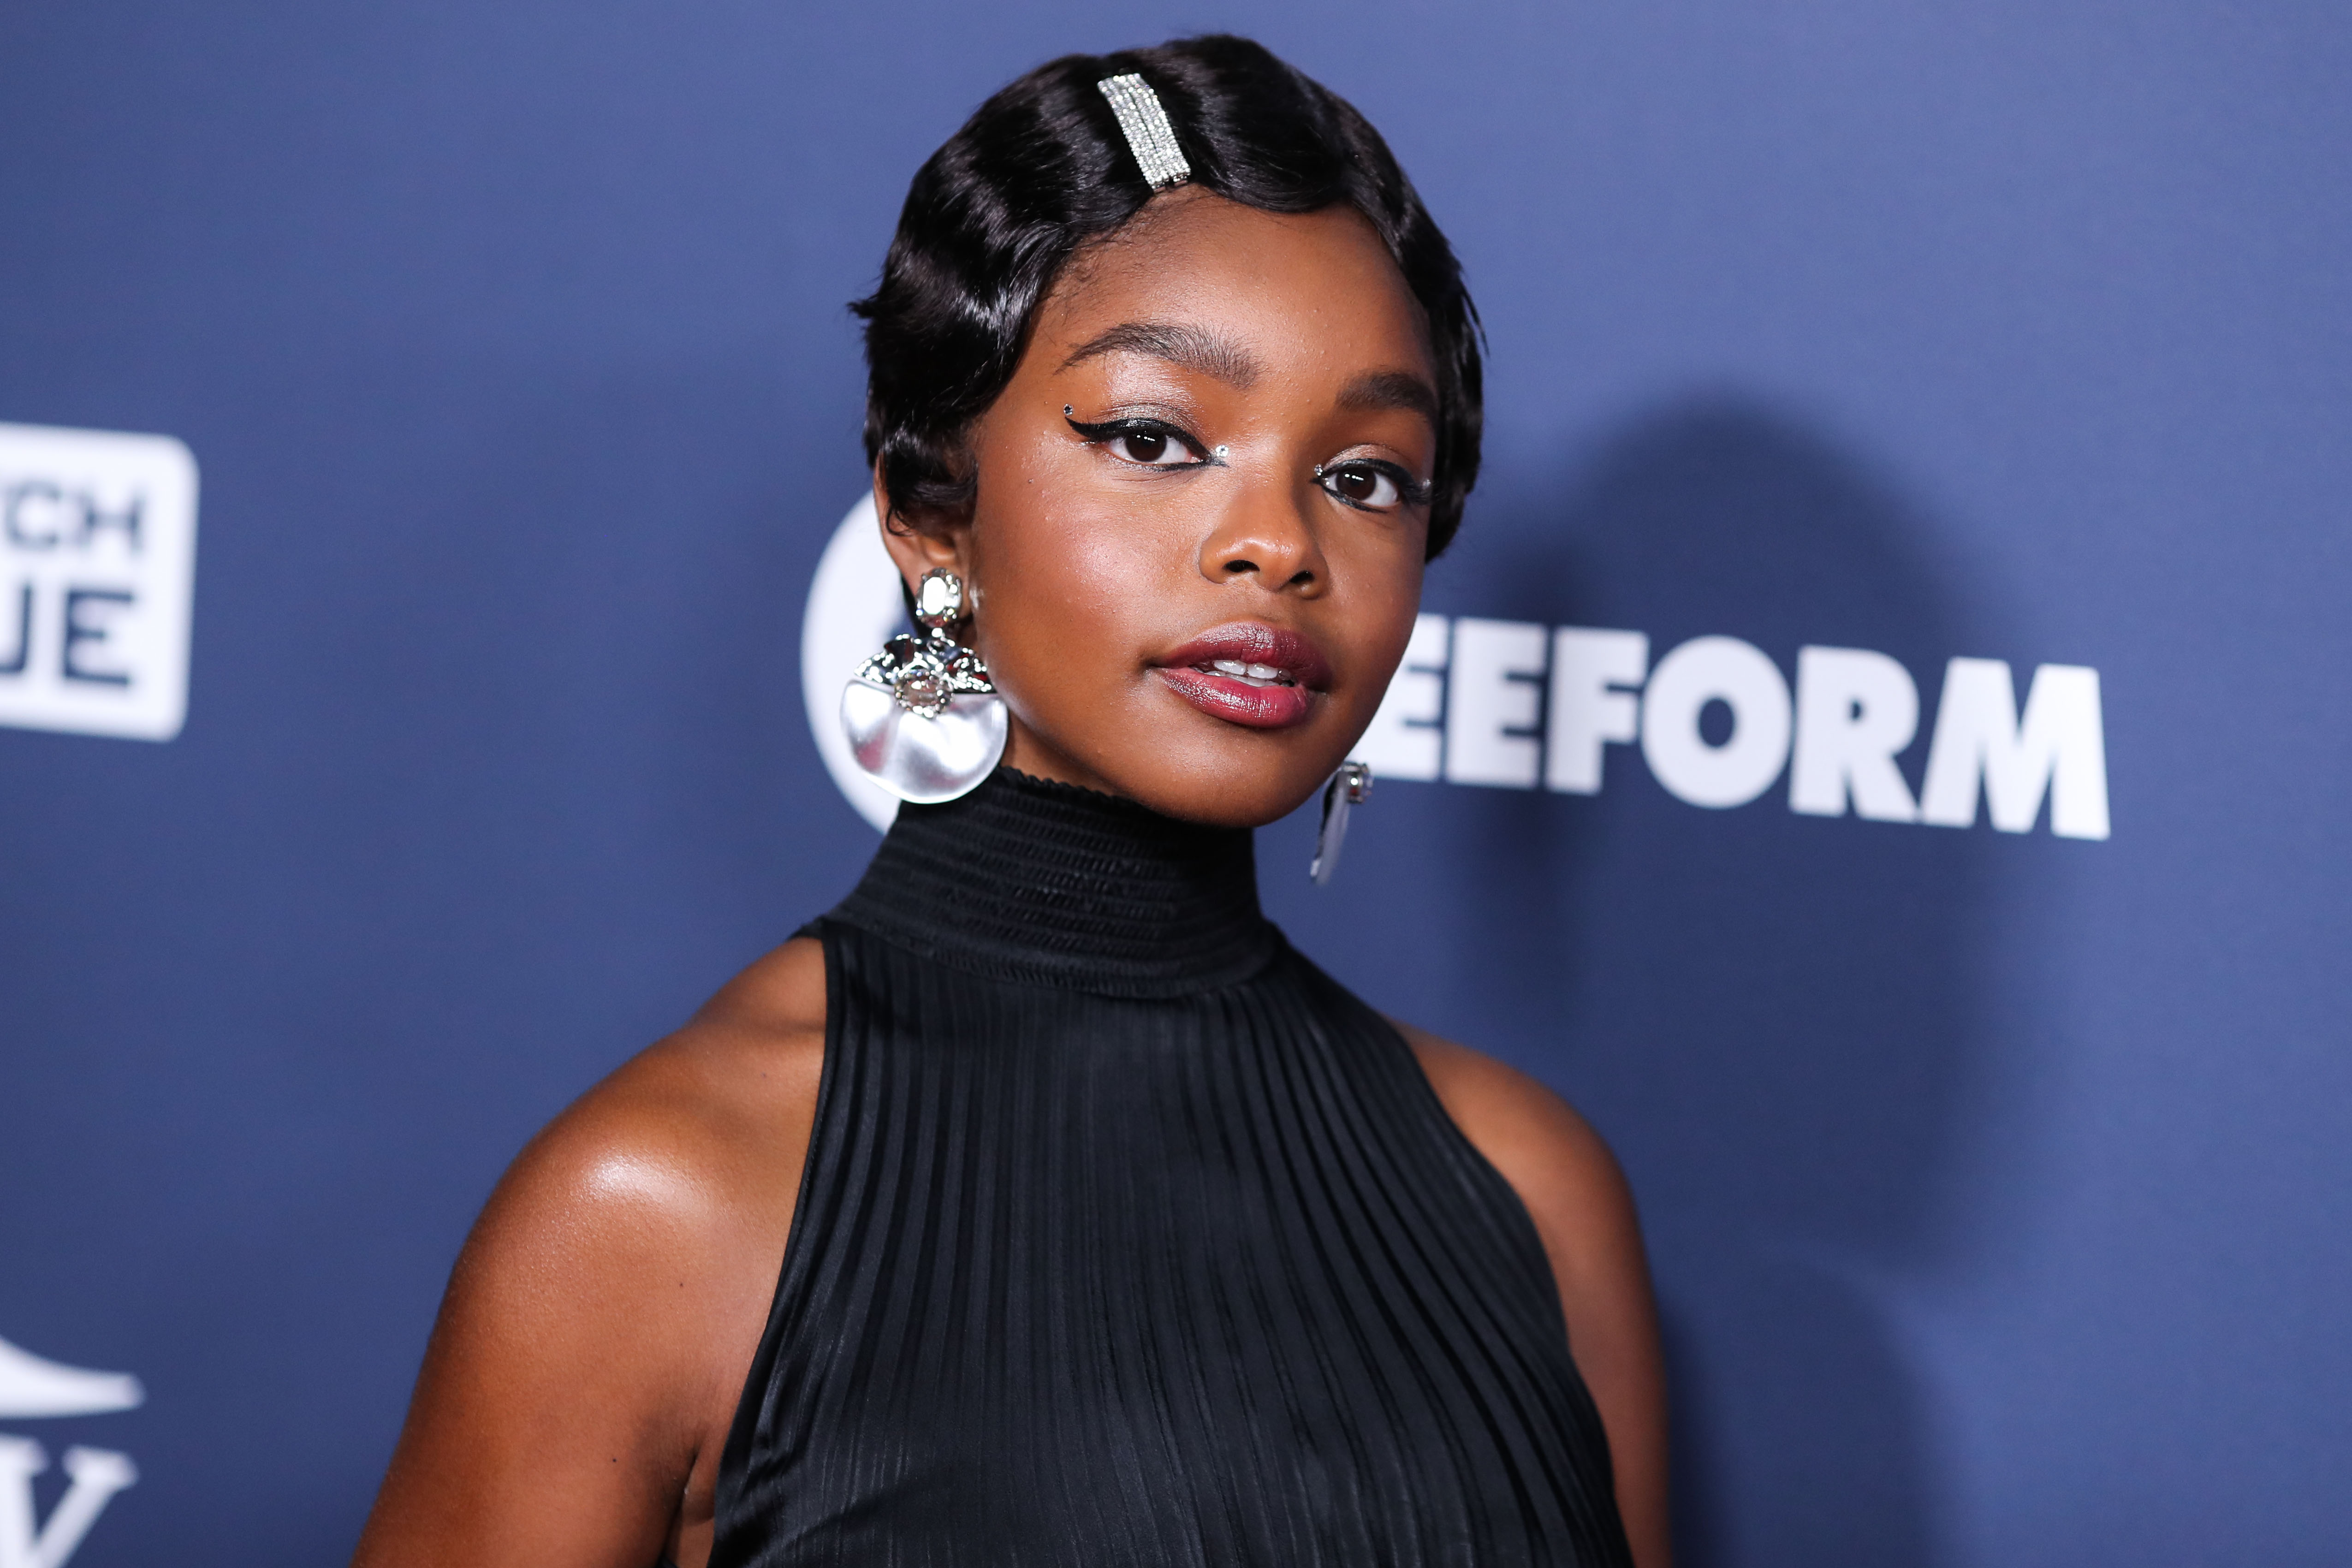 Actress Marsai Martin arrives at Variety's Power Of Young Hollywood 2019 held at the h Club Los Angeles on August 6, 2019 in Hollywood, Los Angeles, California, United States.